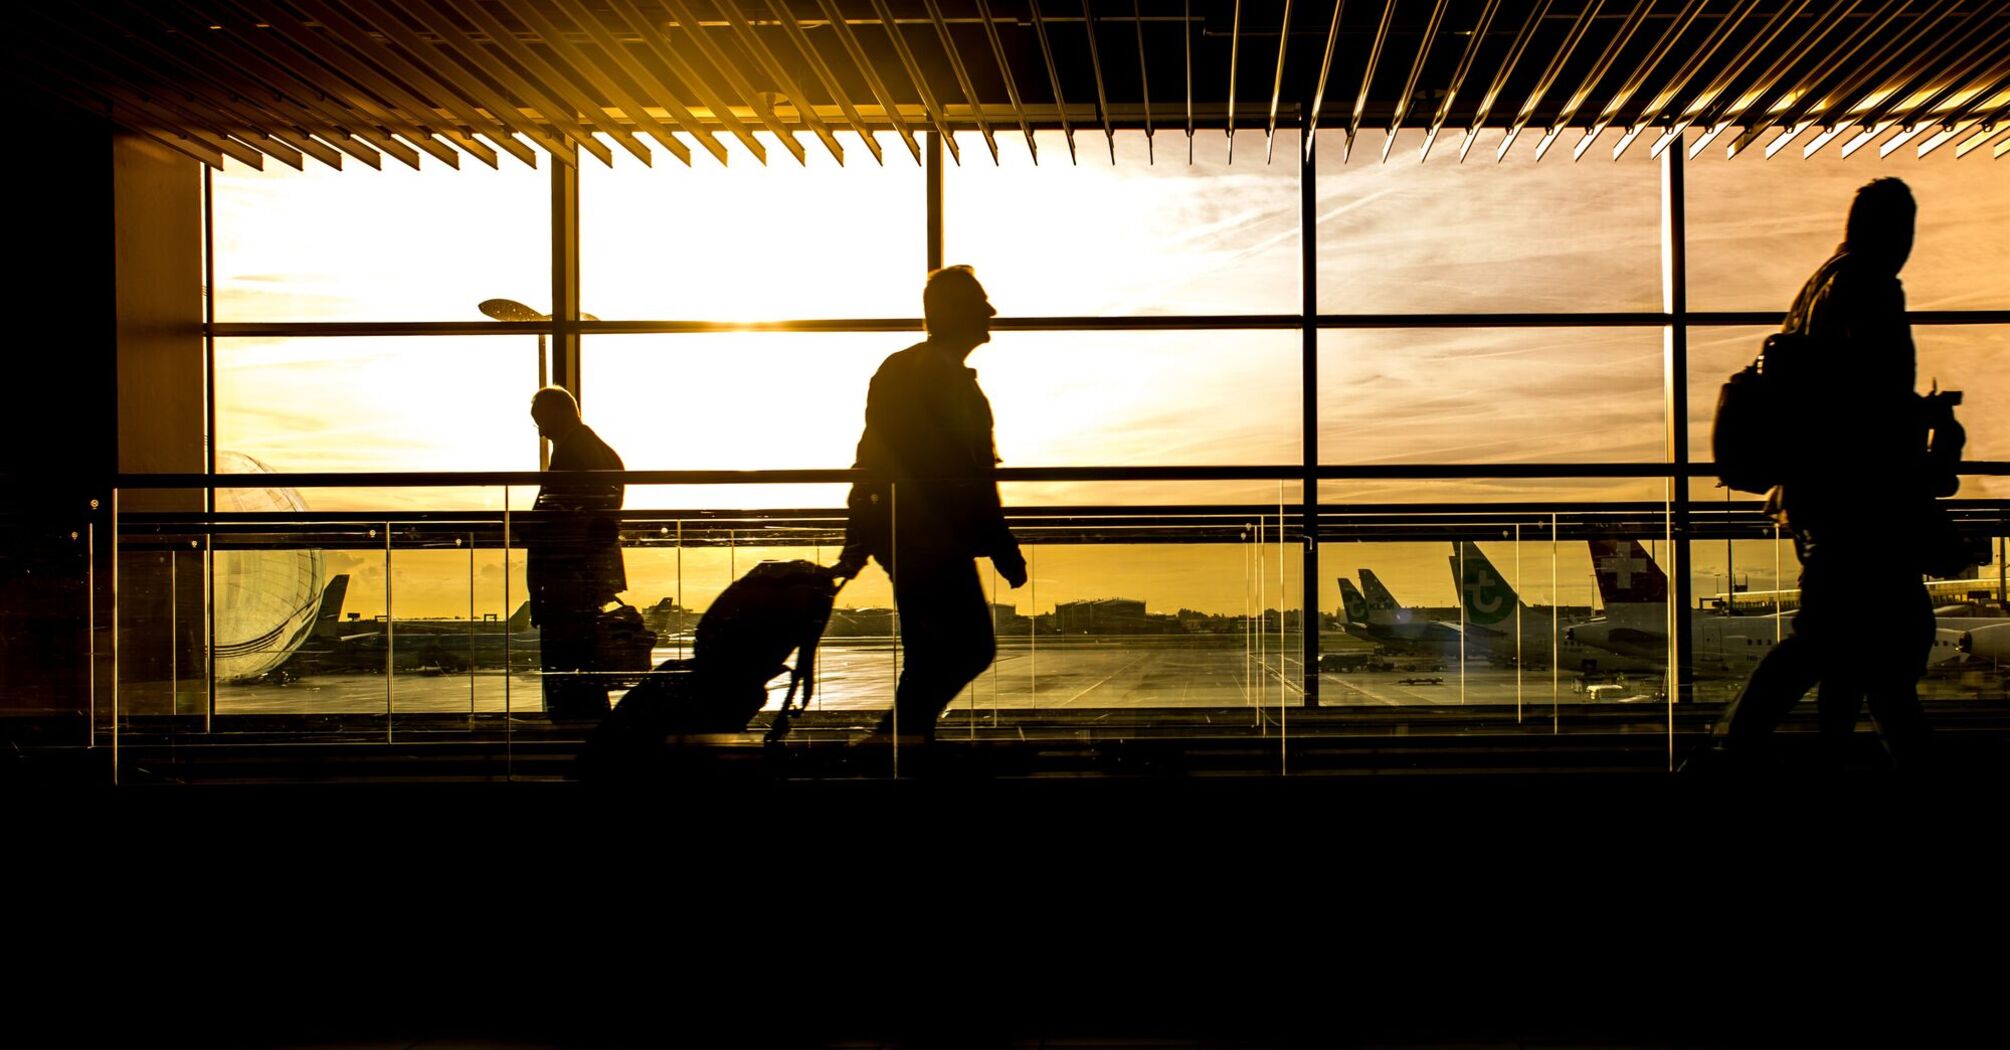 Passengers walking at the airport terminal with a sunrise in the background